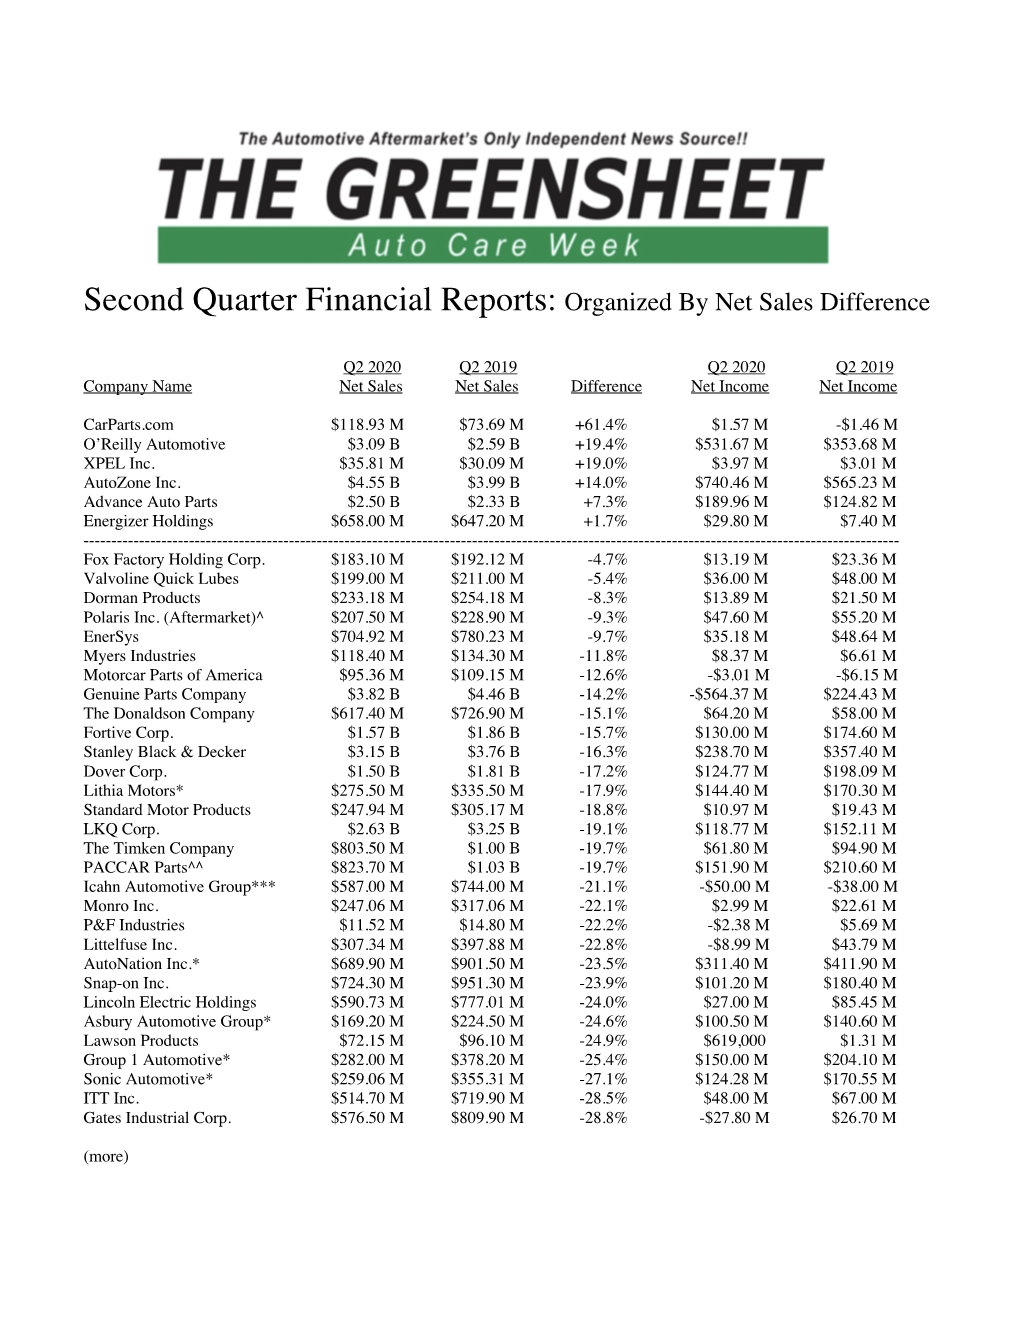 Second Quarter Financial Reports: Organized by Net Sales Difference